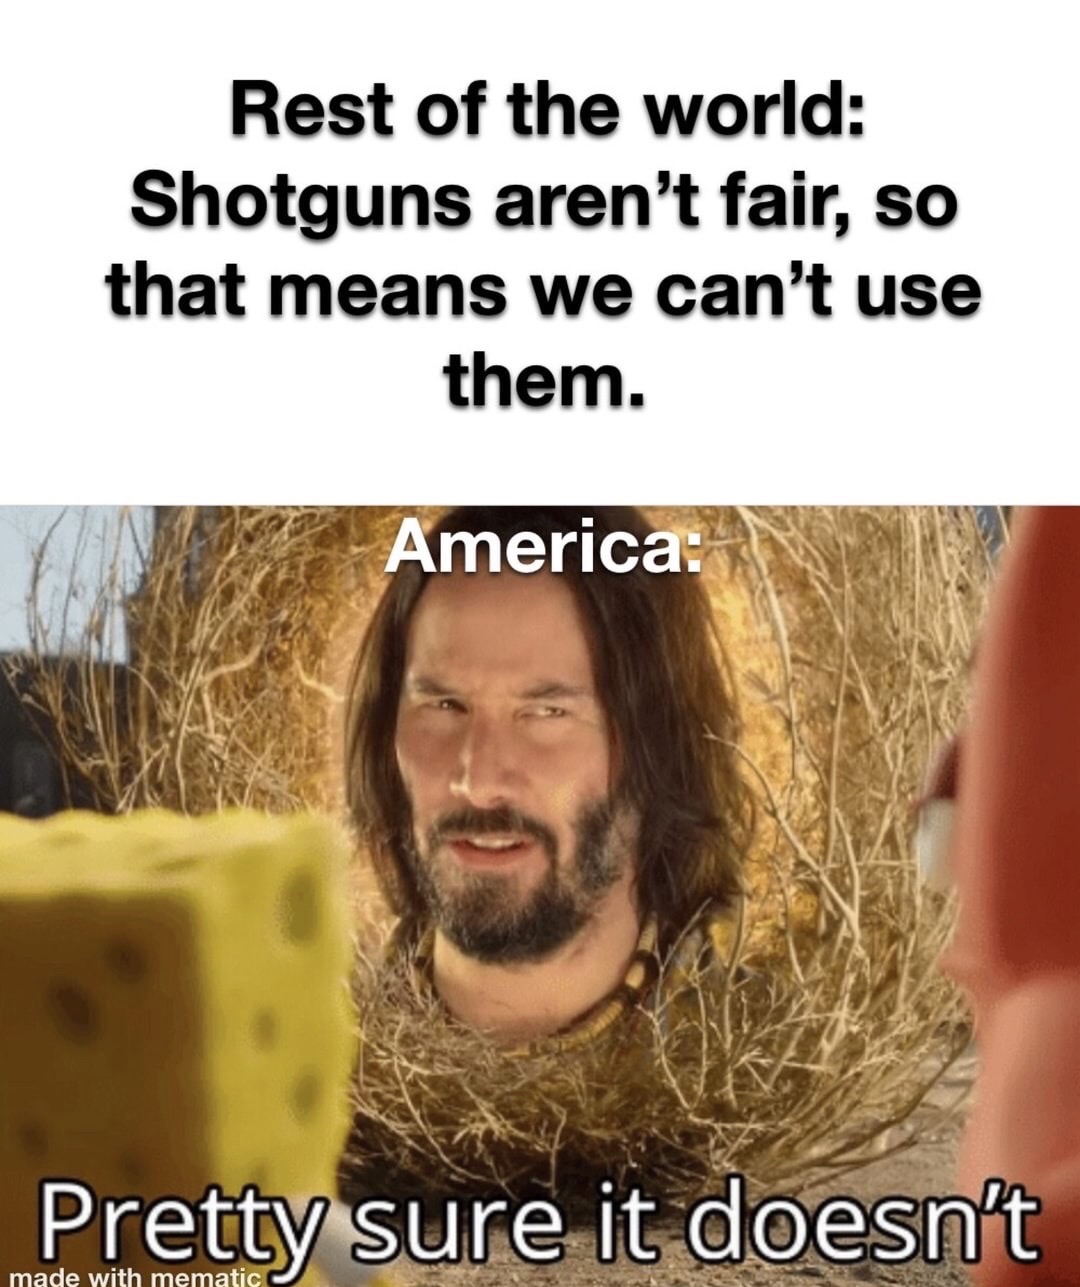 keanu reeves pretty sure it doesn t - Rest of the world Shotguns aren't fair, so that means we can't use them. America Pretty sure it doesn't made with mematic